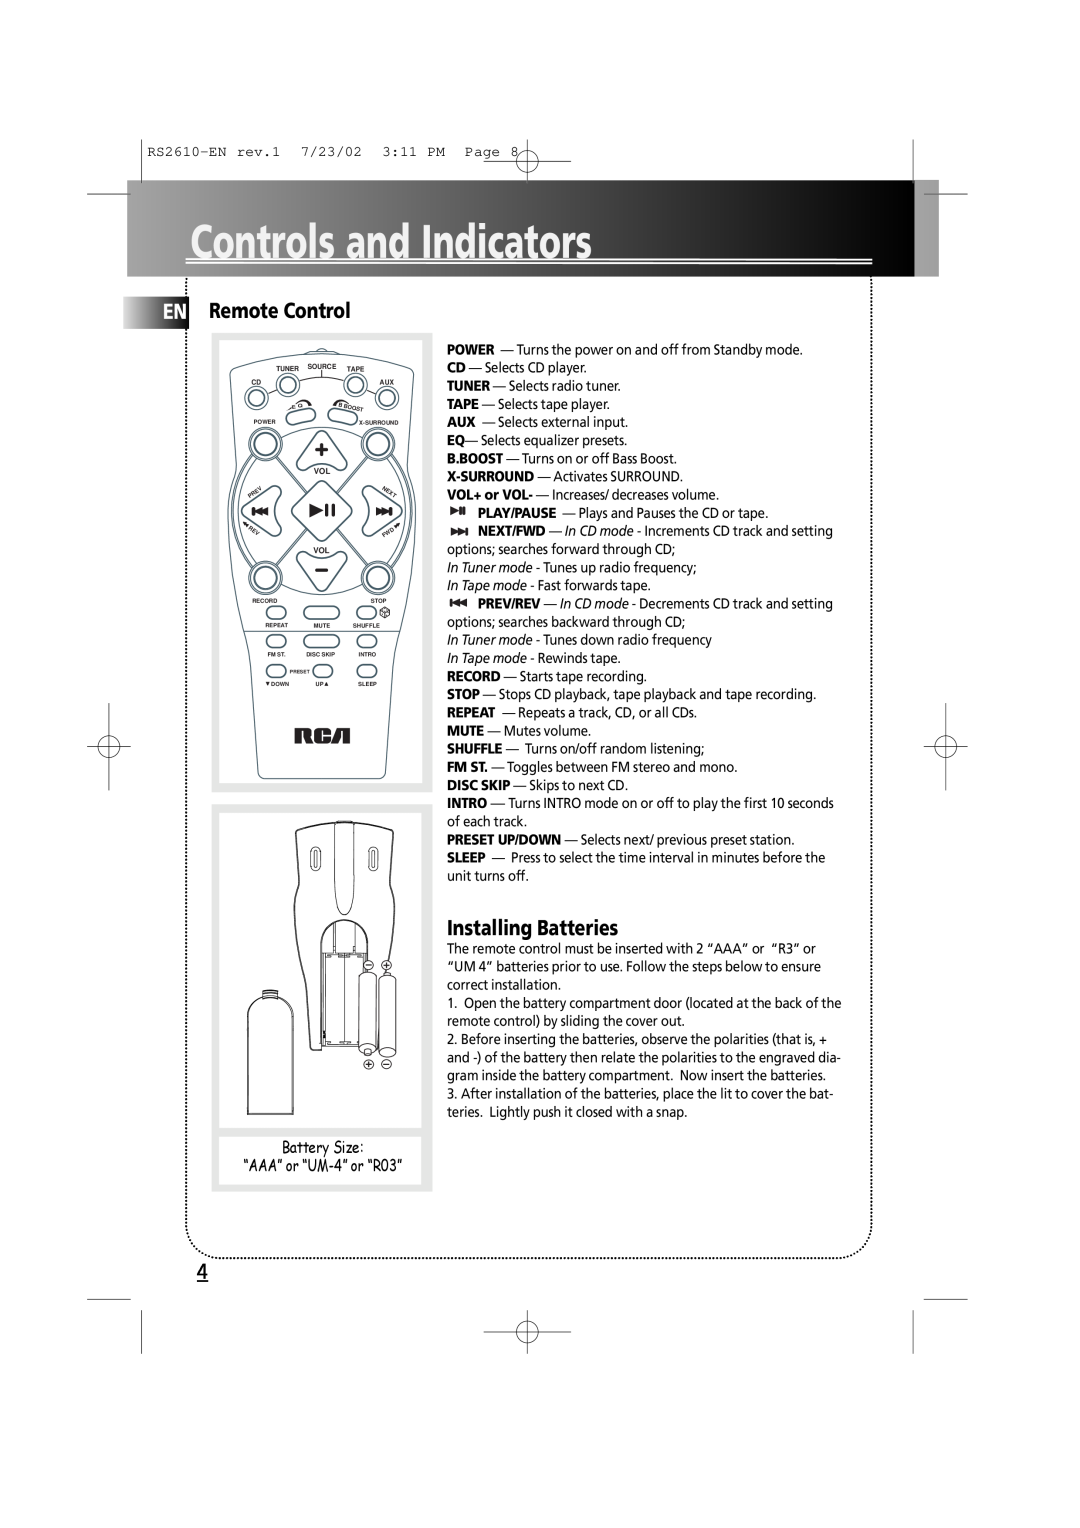 RCA RS2610 manual EN Remote Control, Installing Batteries, Controls and Indicators, Battery Size “AAA” or “UM-4”or “R03” 